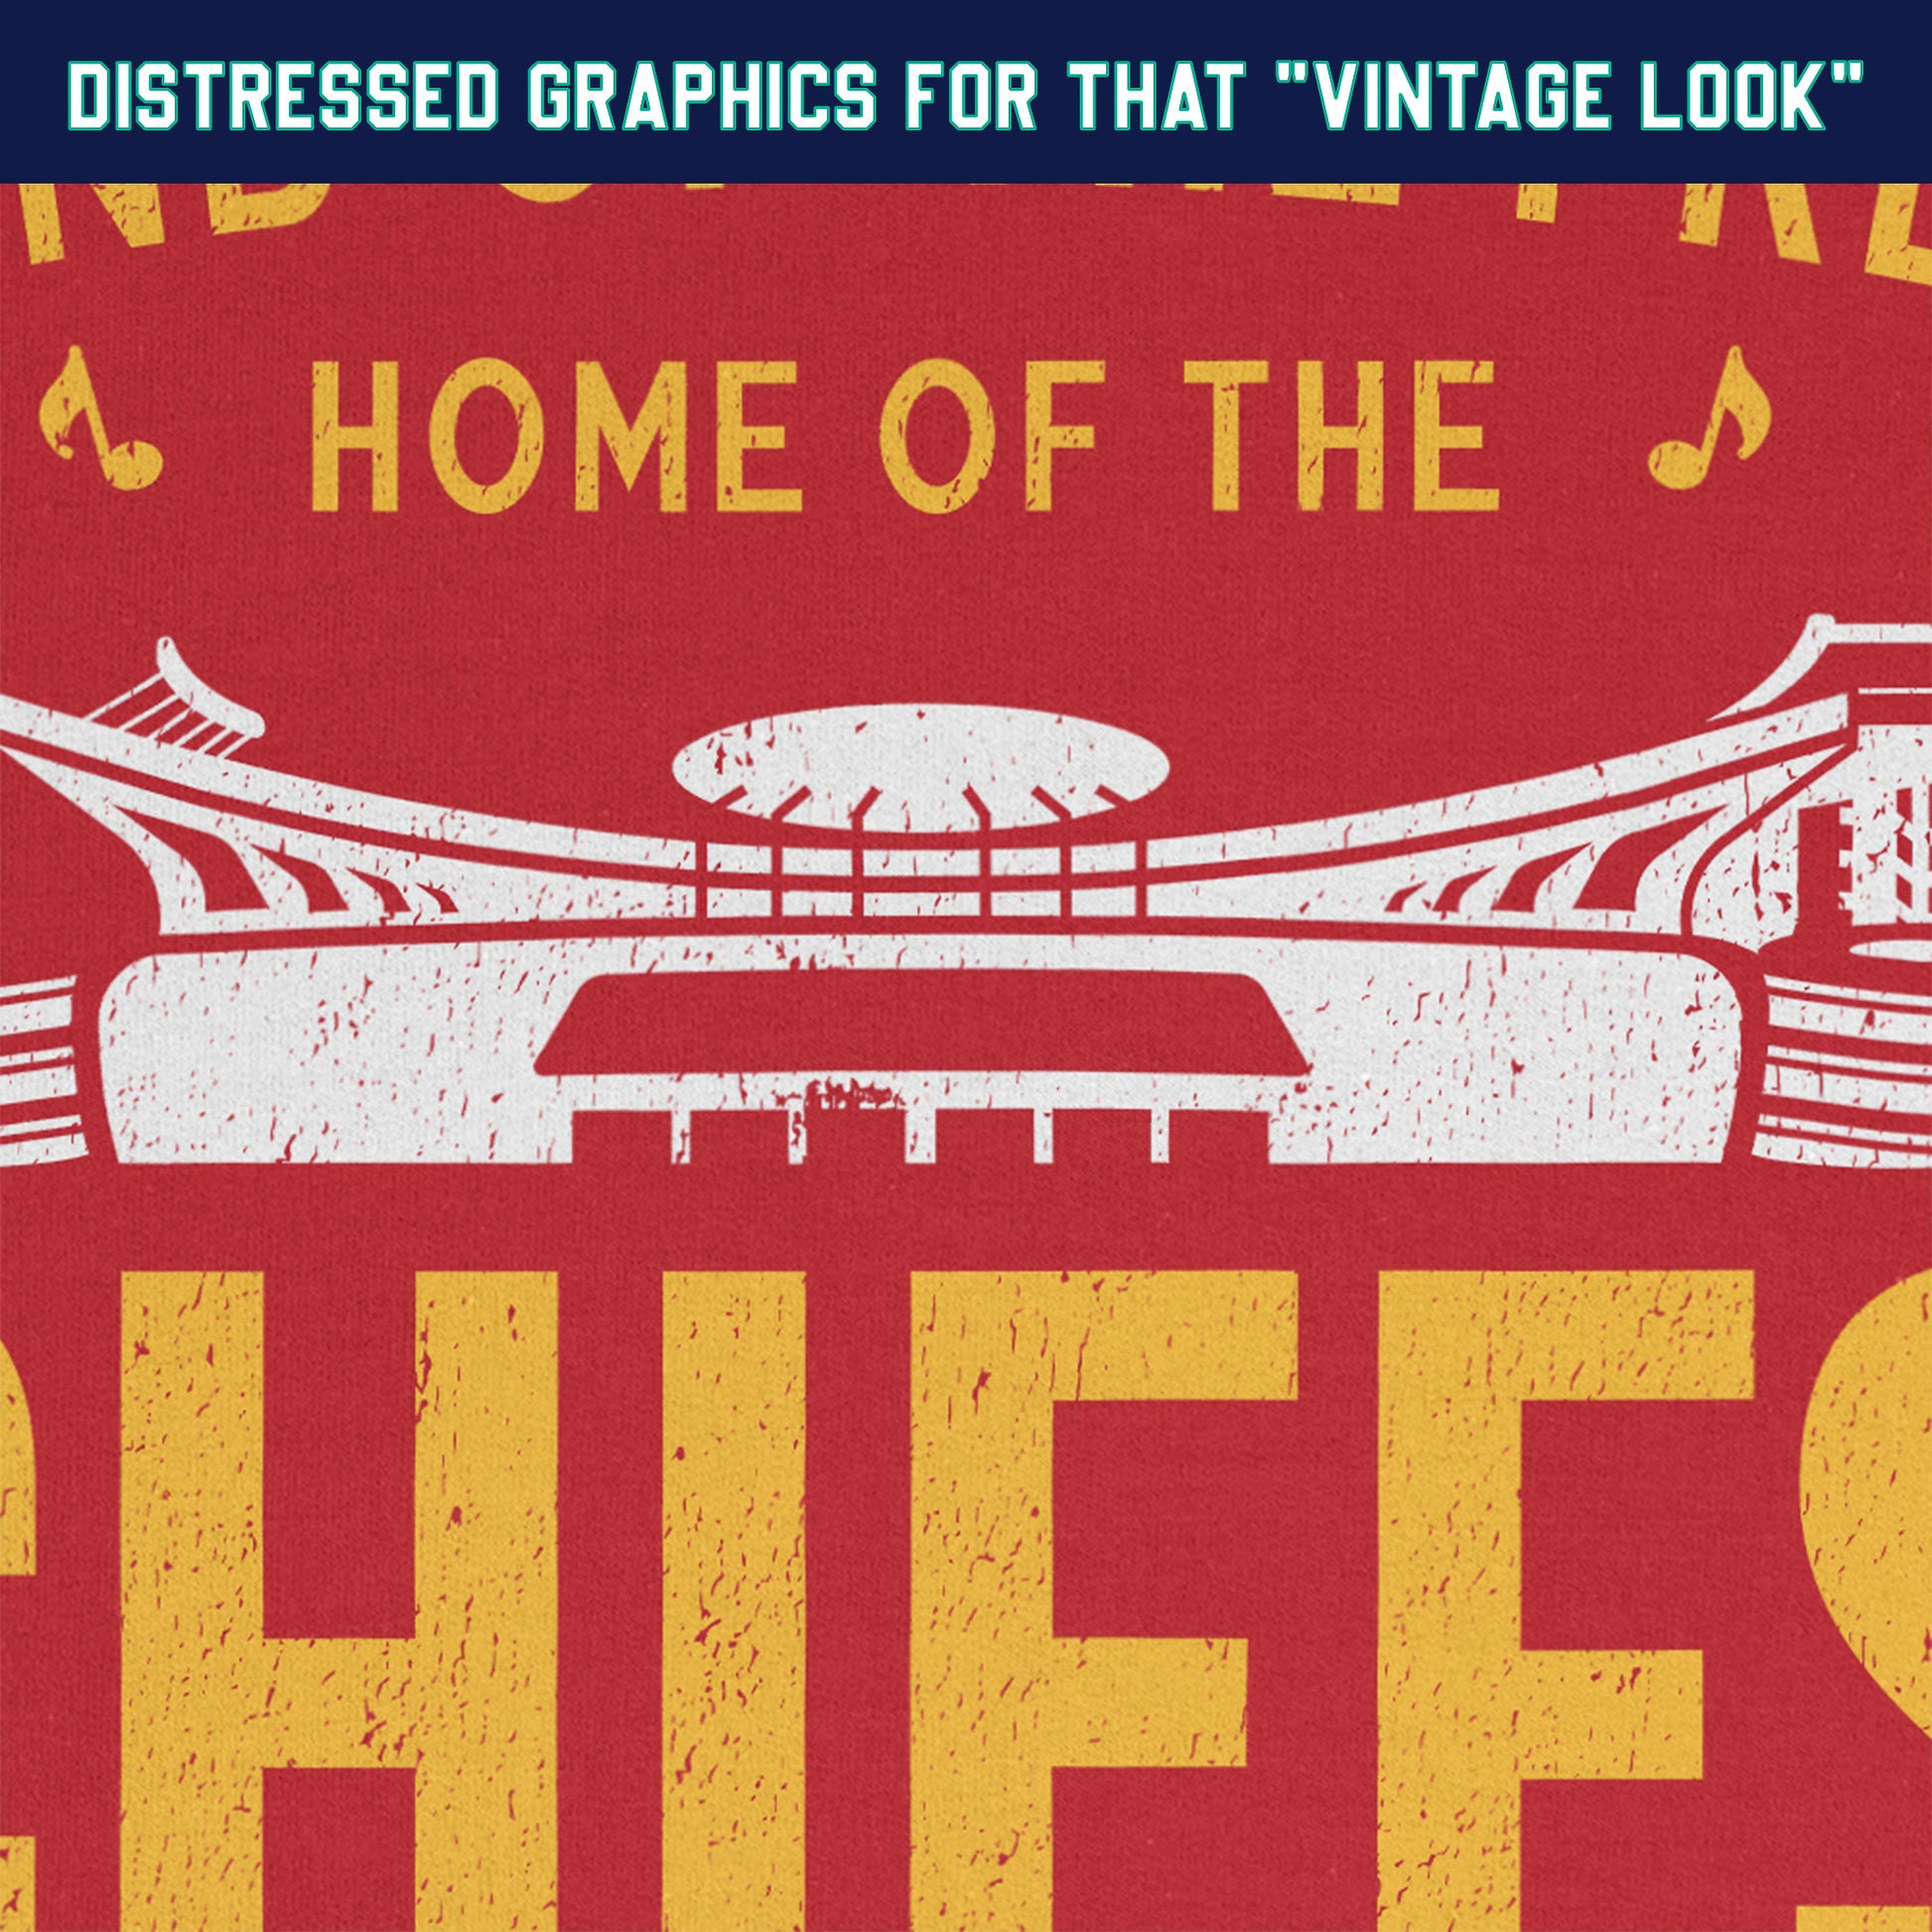 KC Swag Kansas City Chiefs Distressed White & Gold Home Of The Chiefs on a Red Crewneck Sweatshirt closeup details of distressed graphics